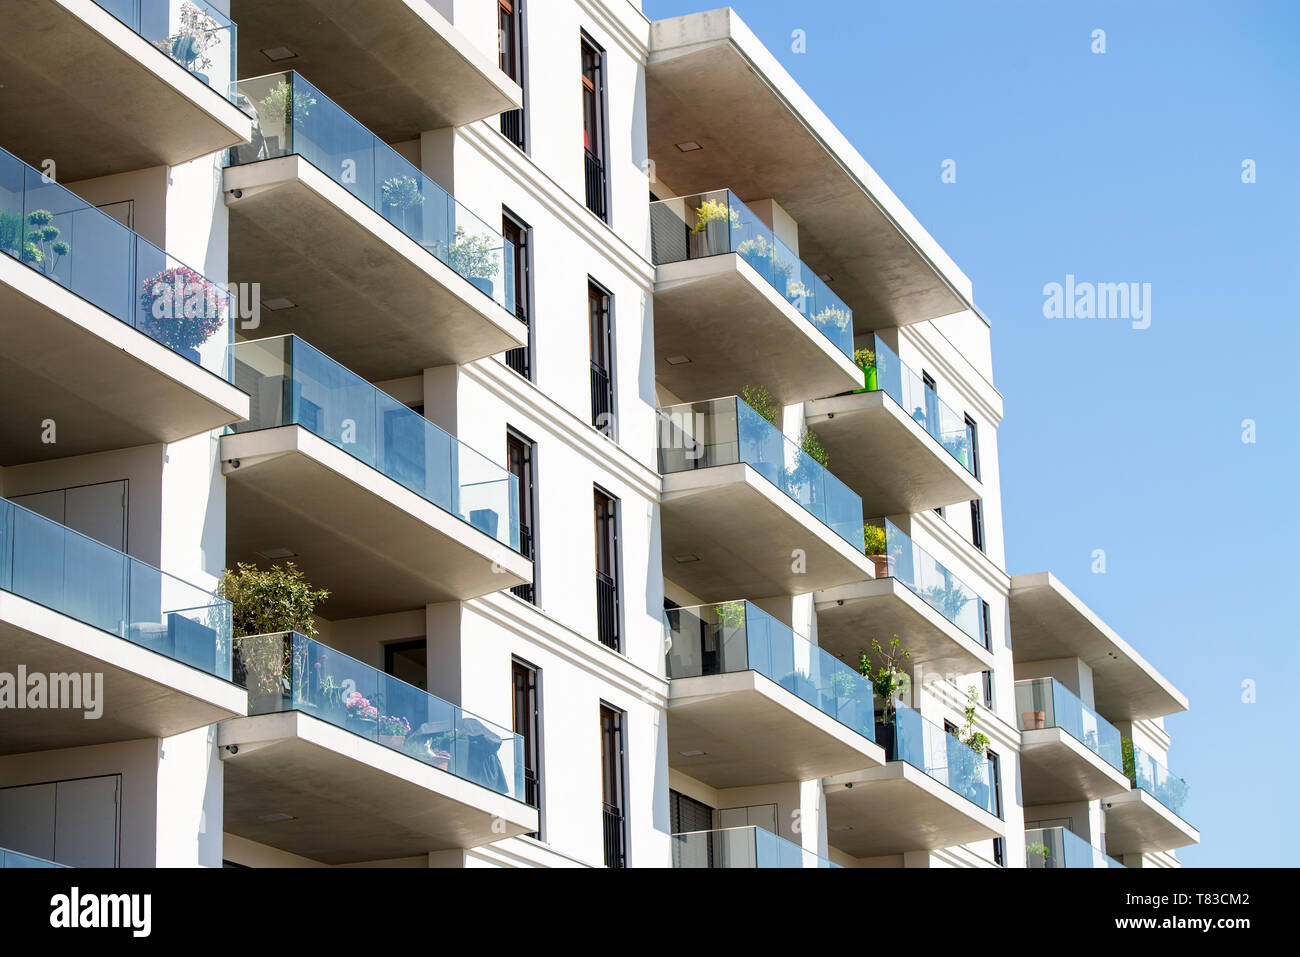 Facade of an apartment house with balconies Stock Photo